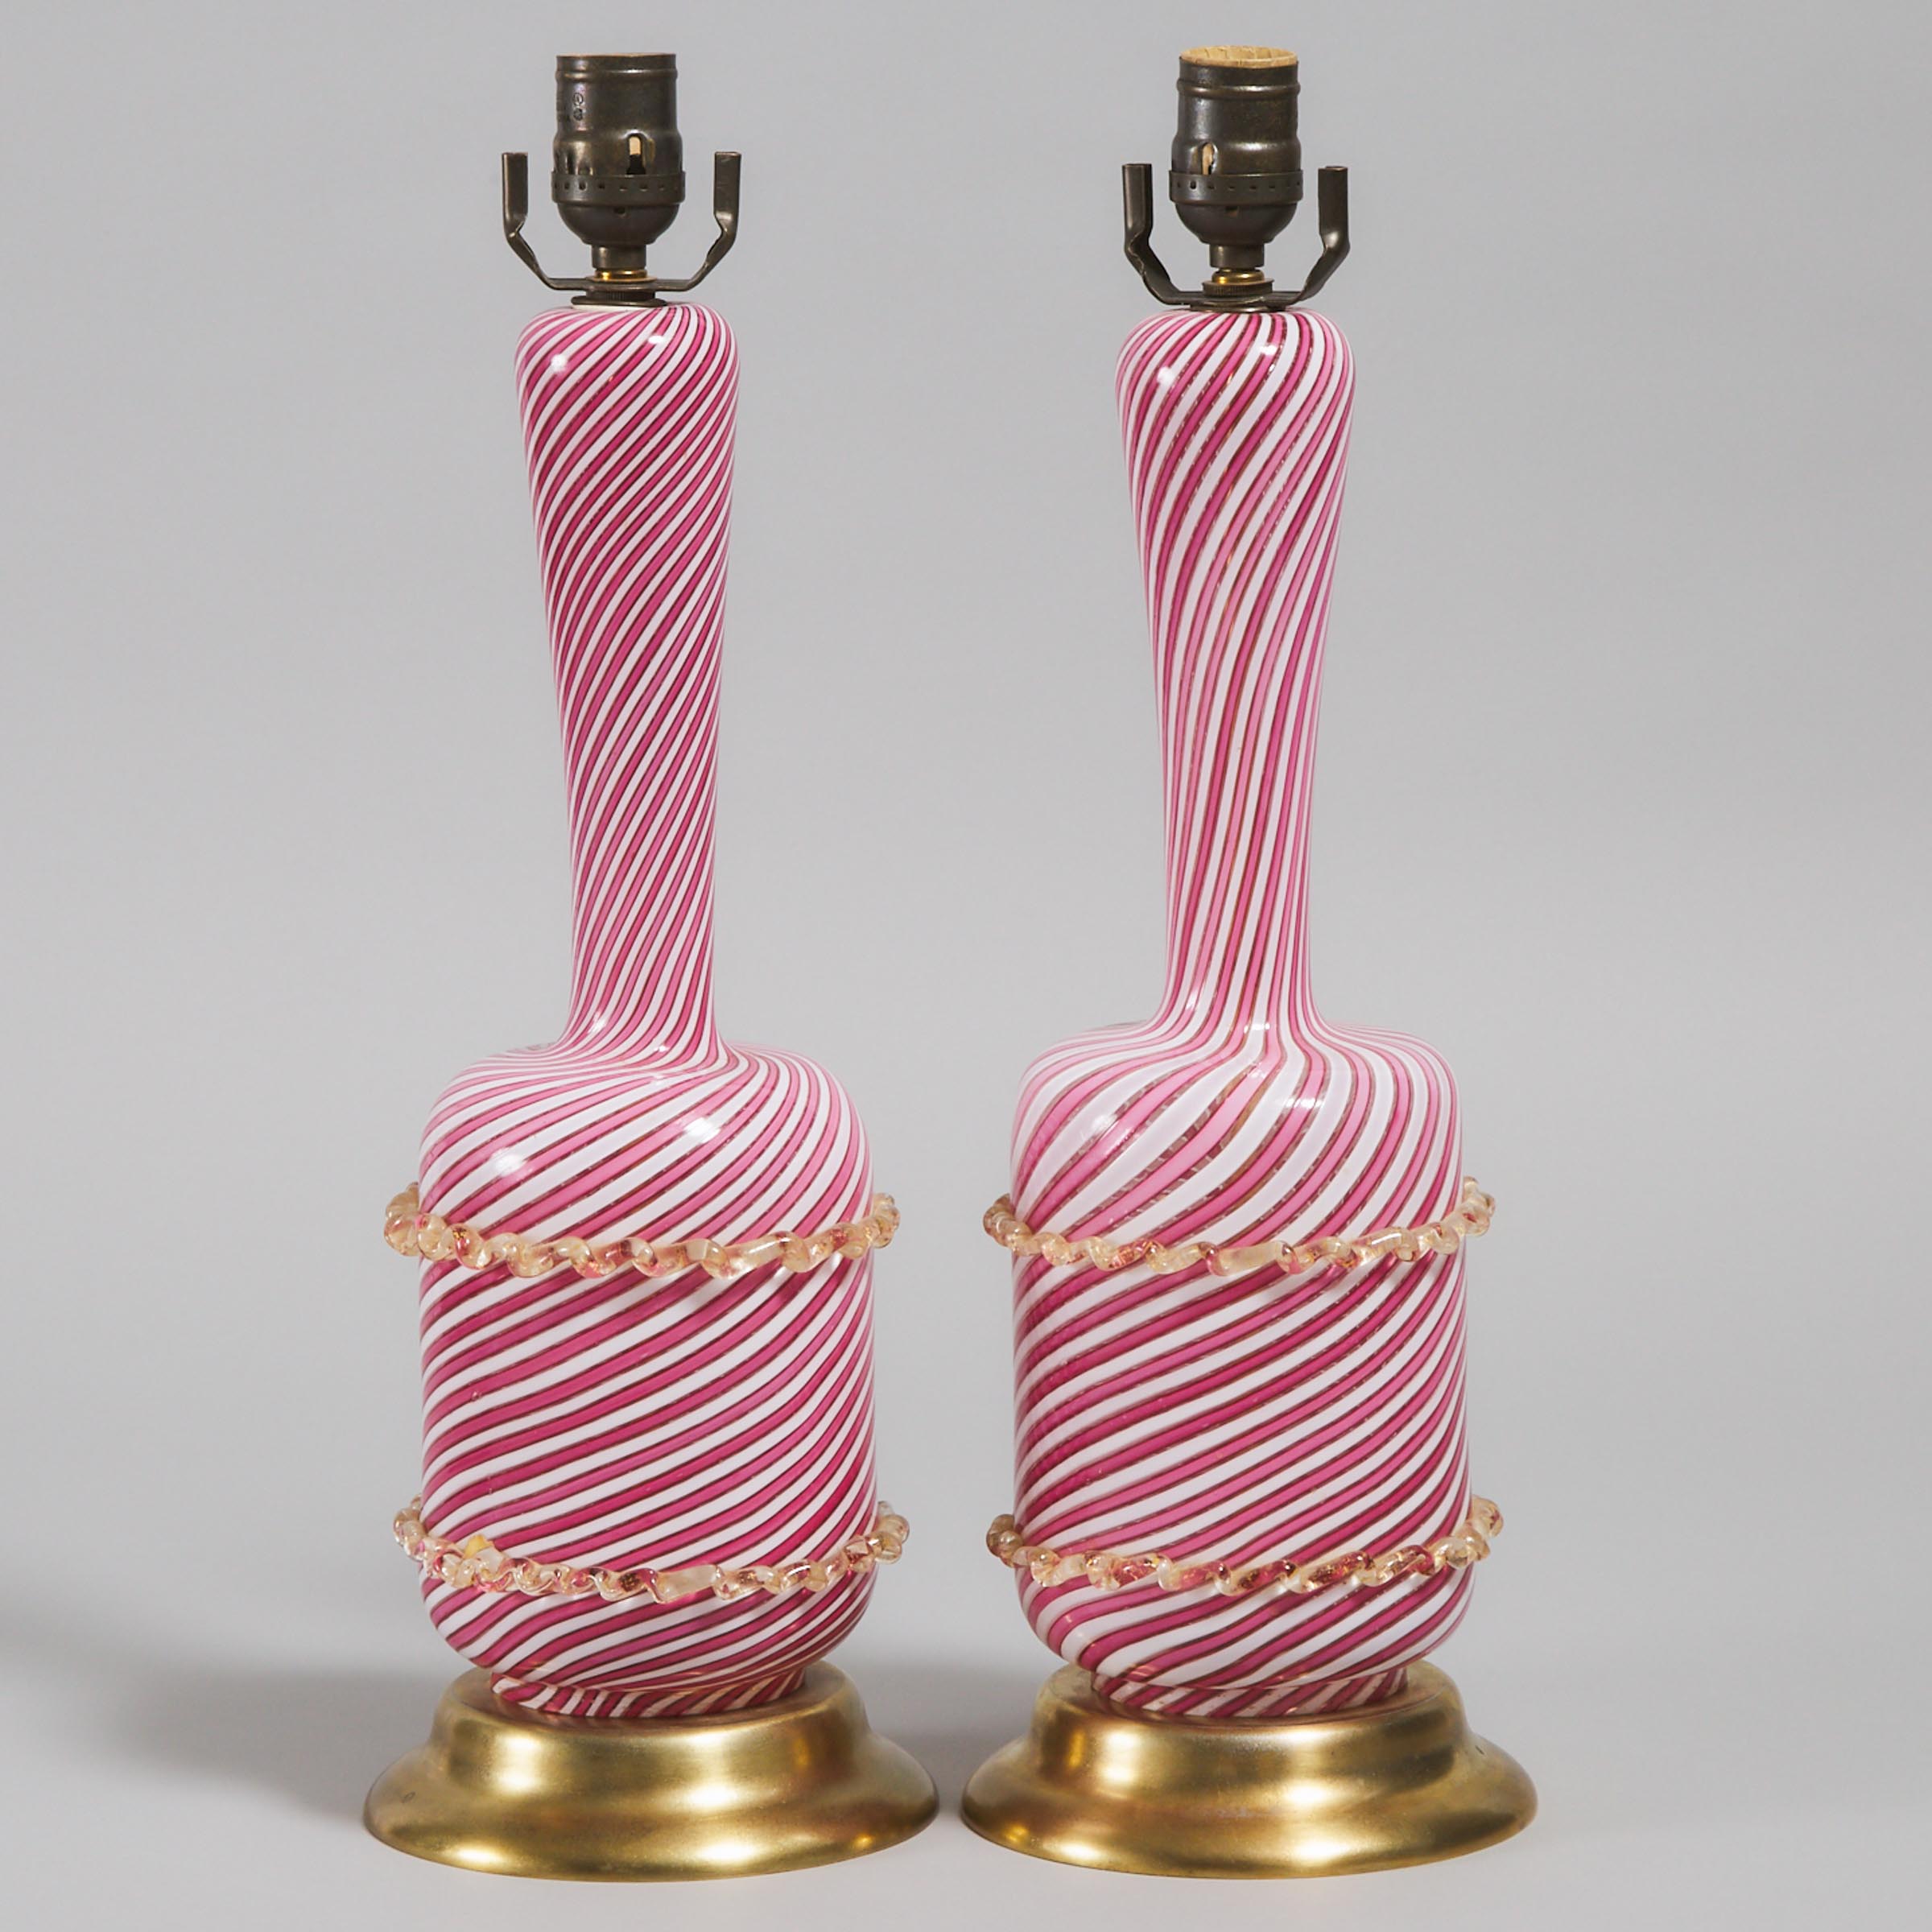 Pair of Murano Pink and Opaque White Striped Glass Table Lamps, 20th century